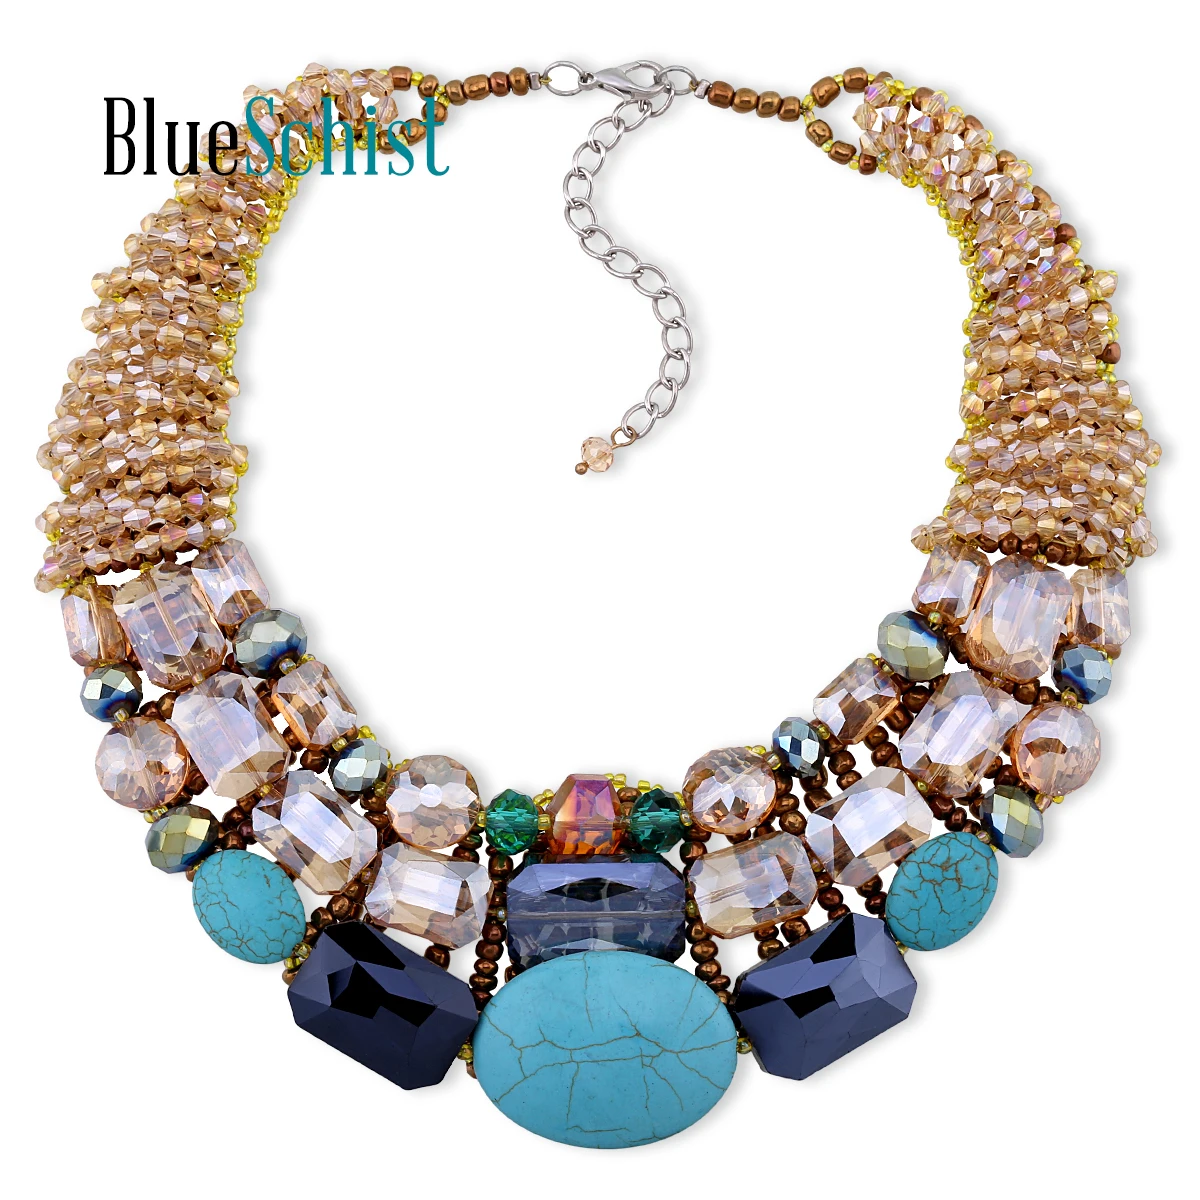 

New Women's Synthetic Turquoise Statement Bohemia Necklace for Women Party Wedding Prom Strands Collar Chokers Necklace Jewelry